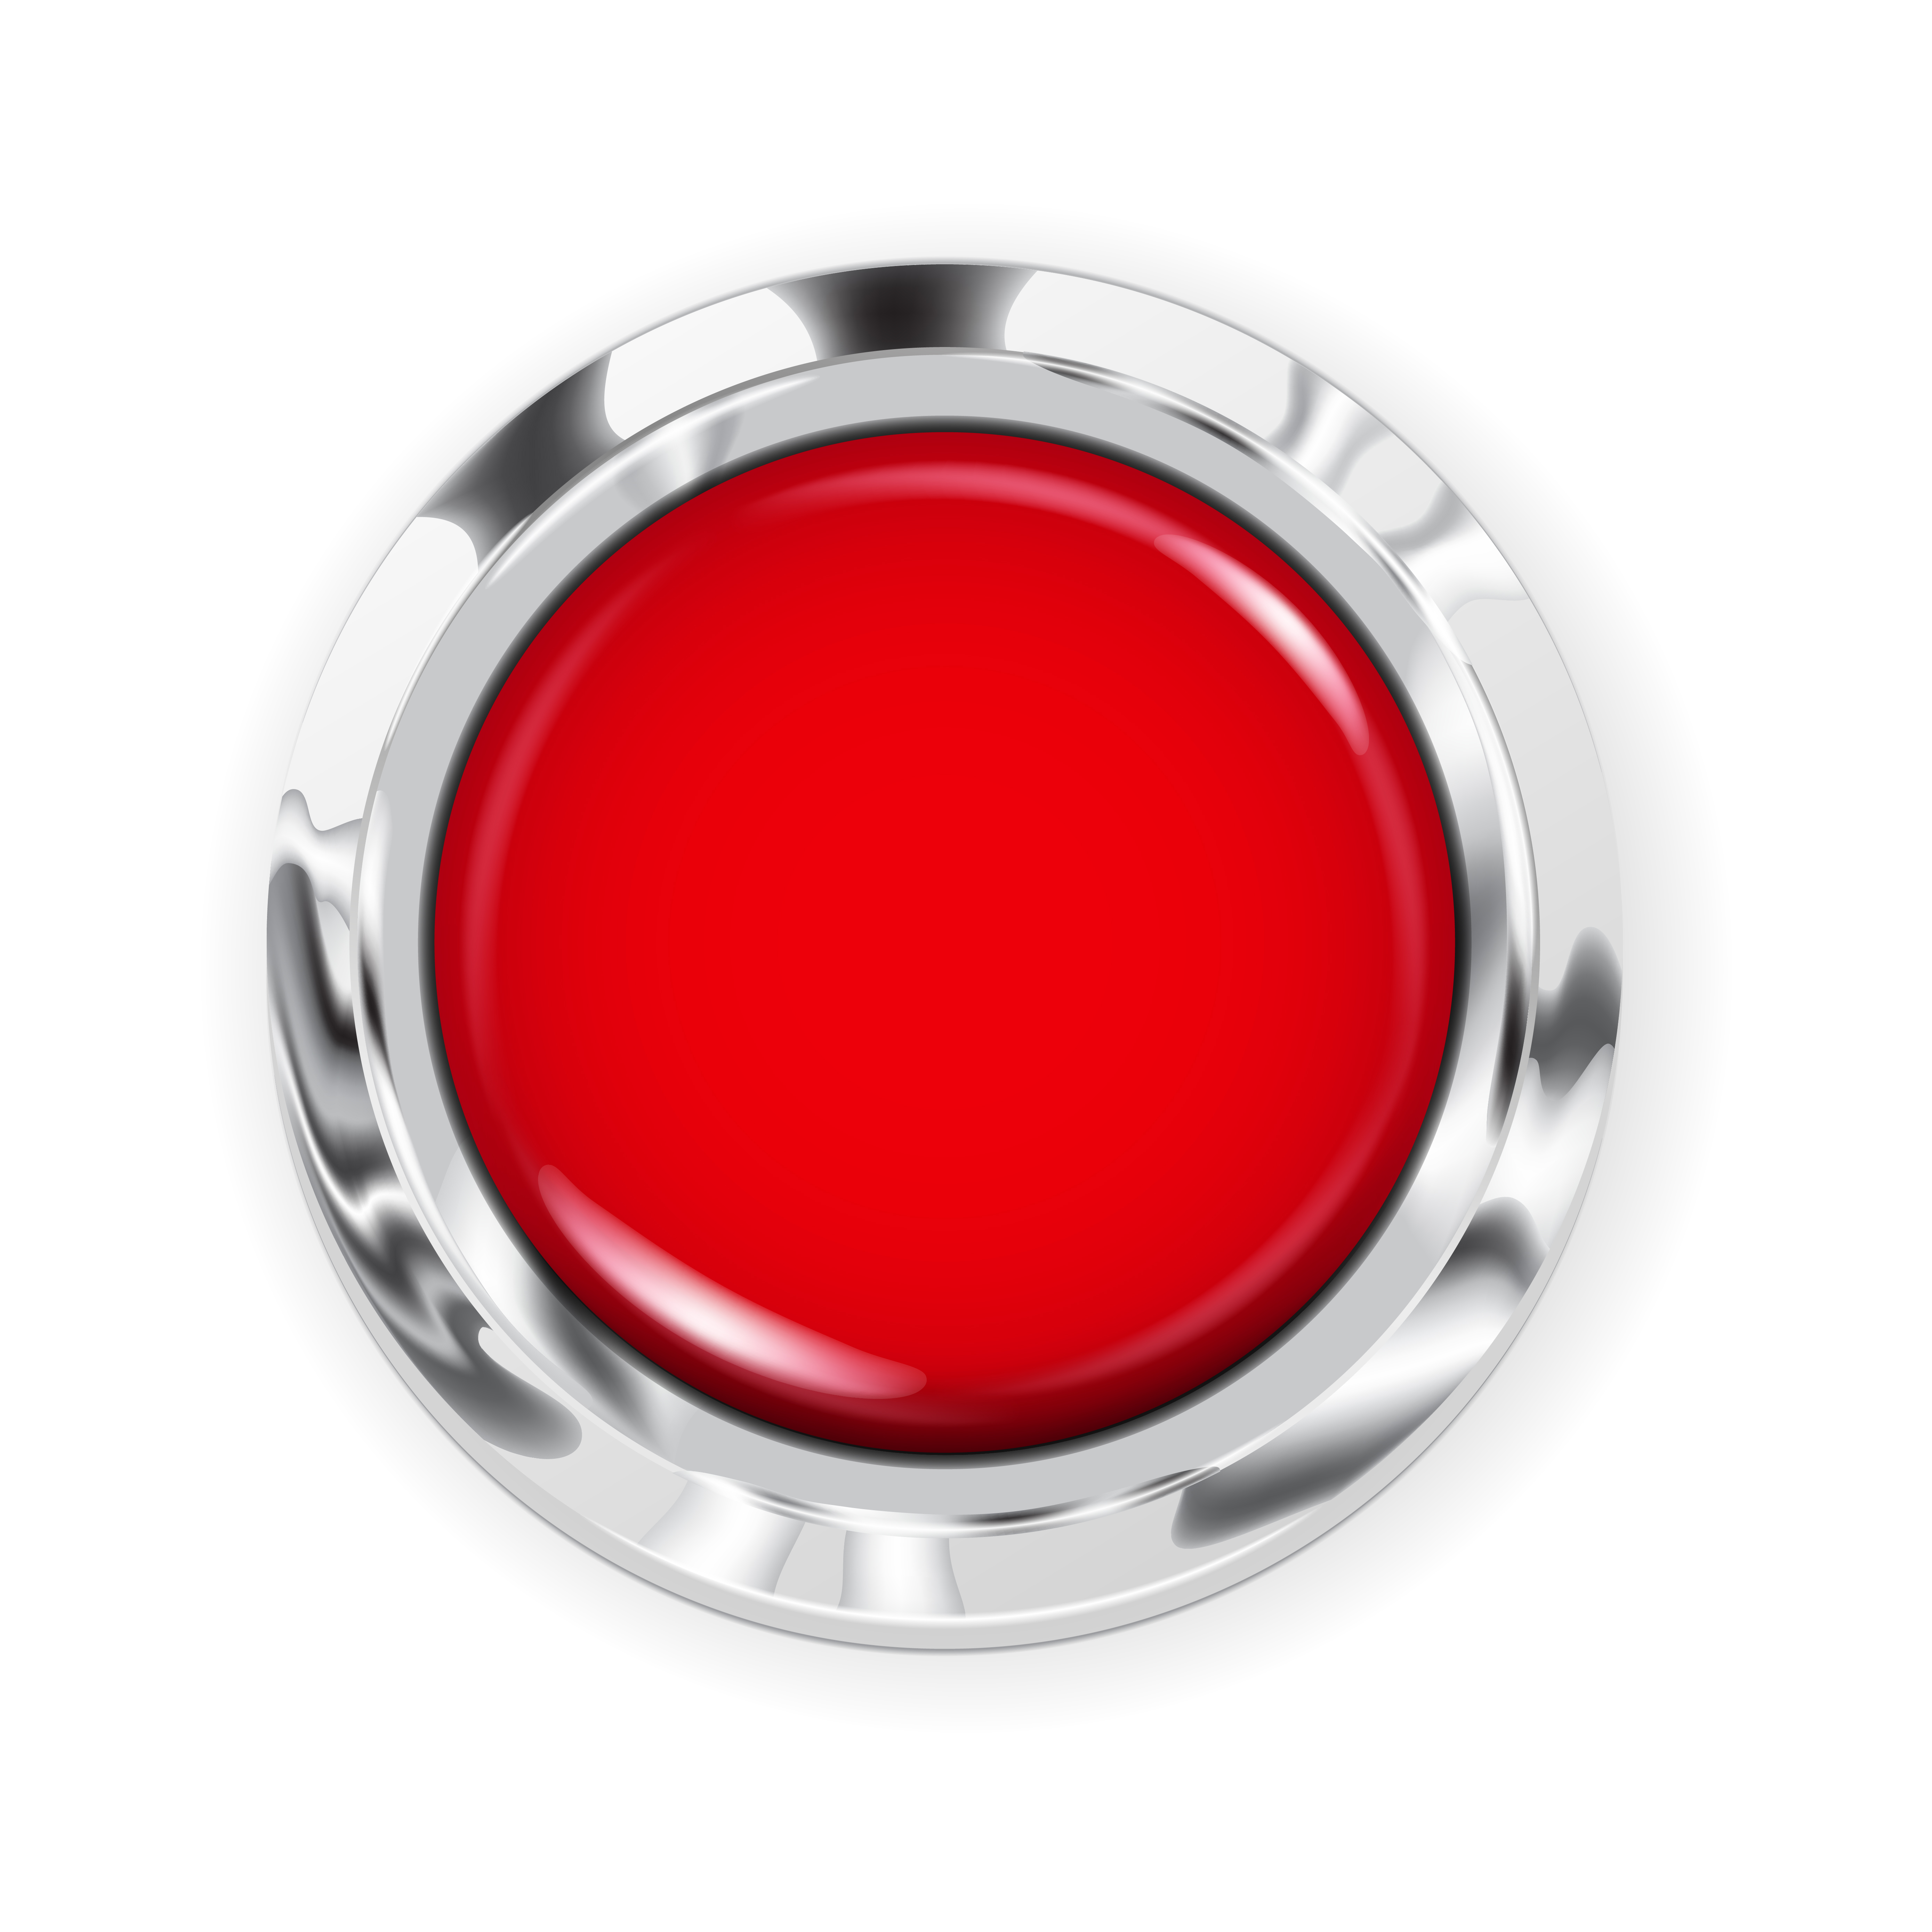 The Big Red Button of Life